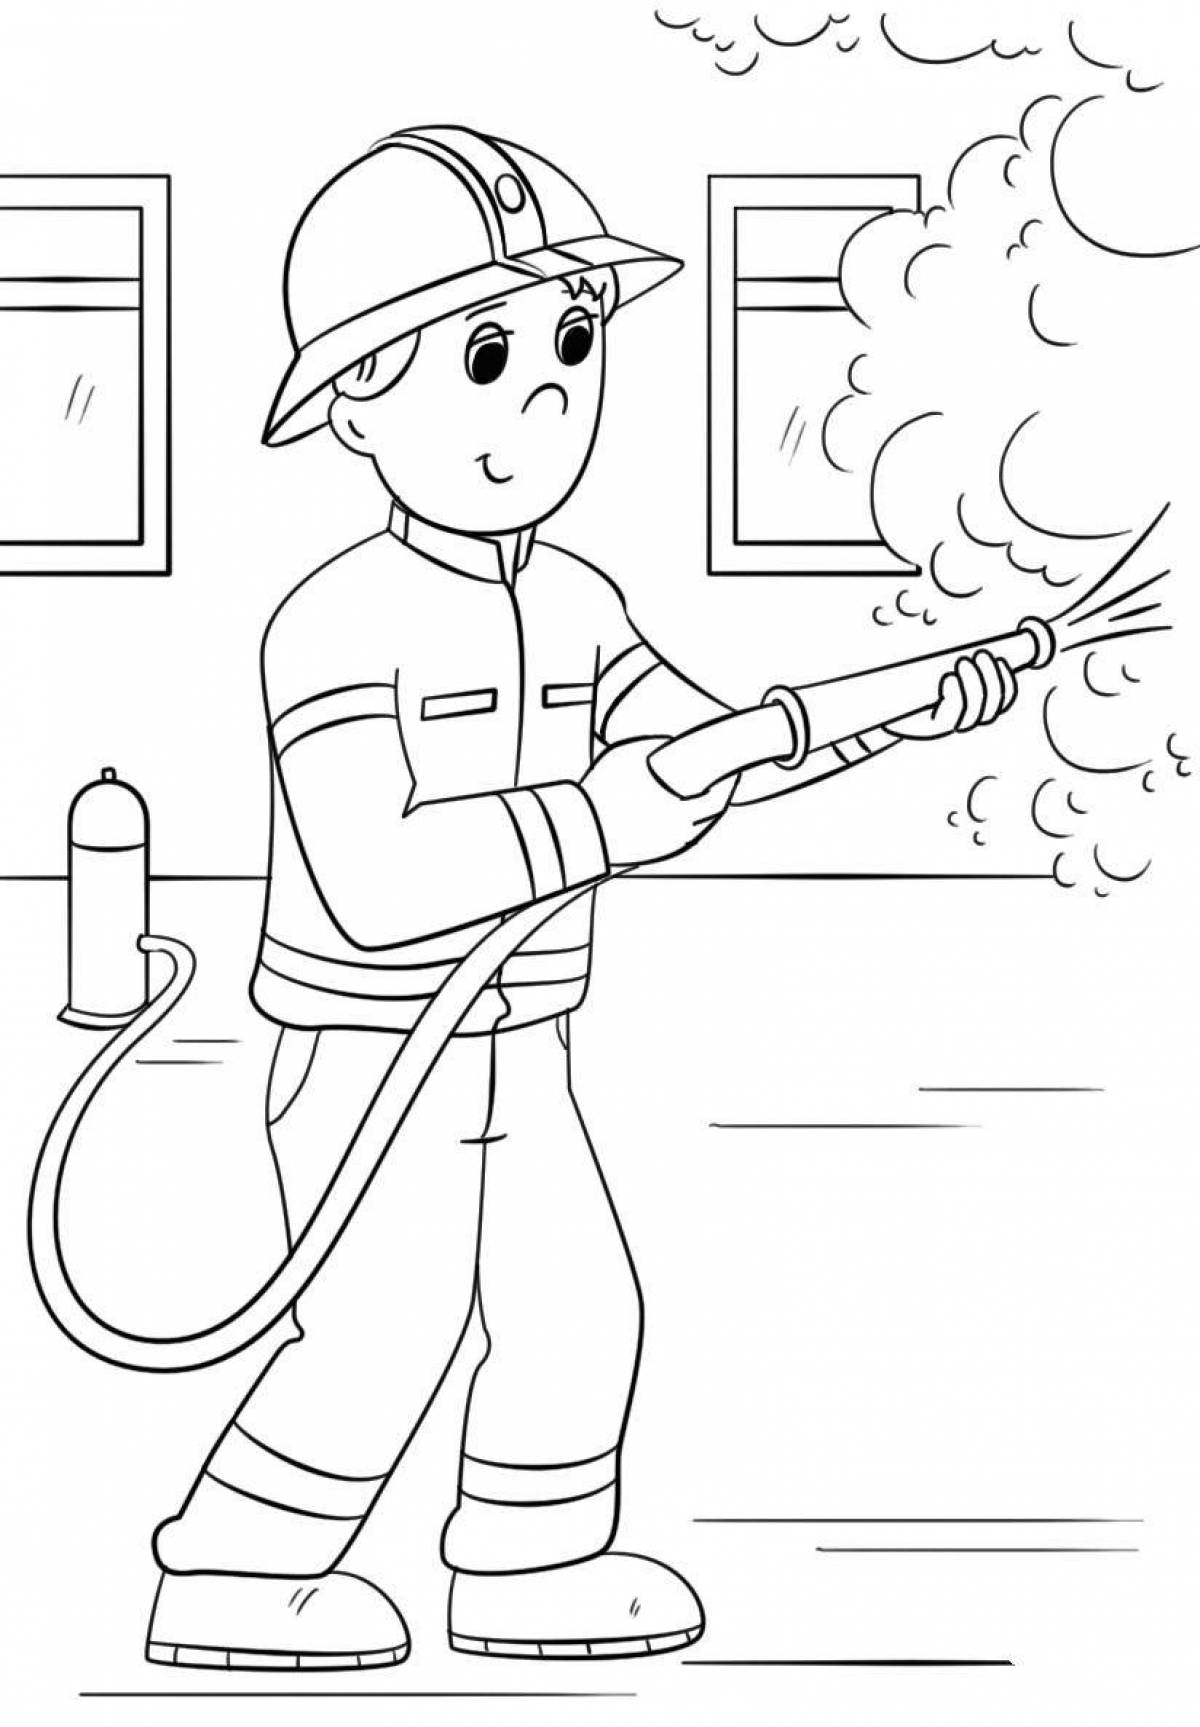 Animated fire safety coloring page